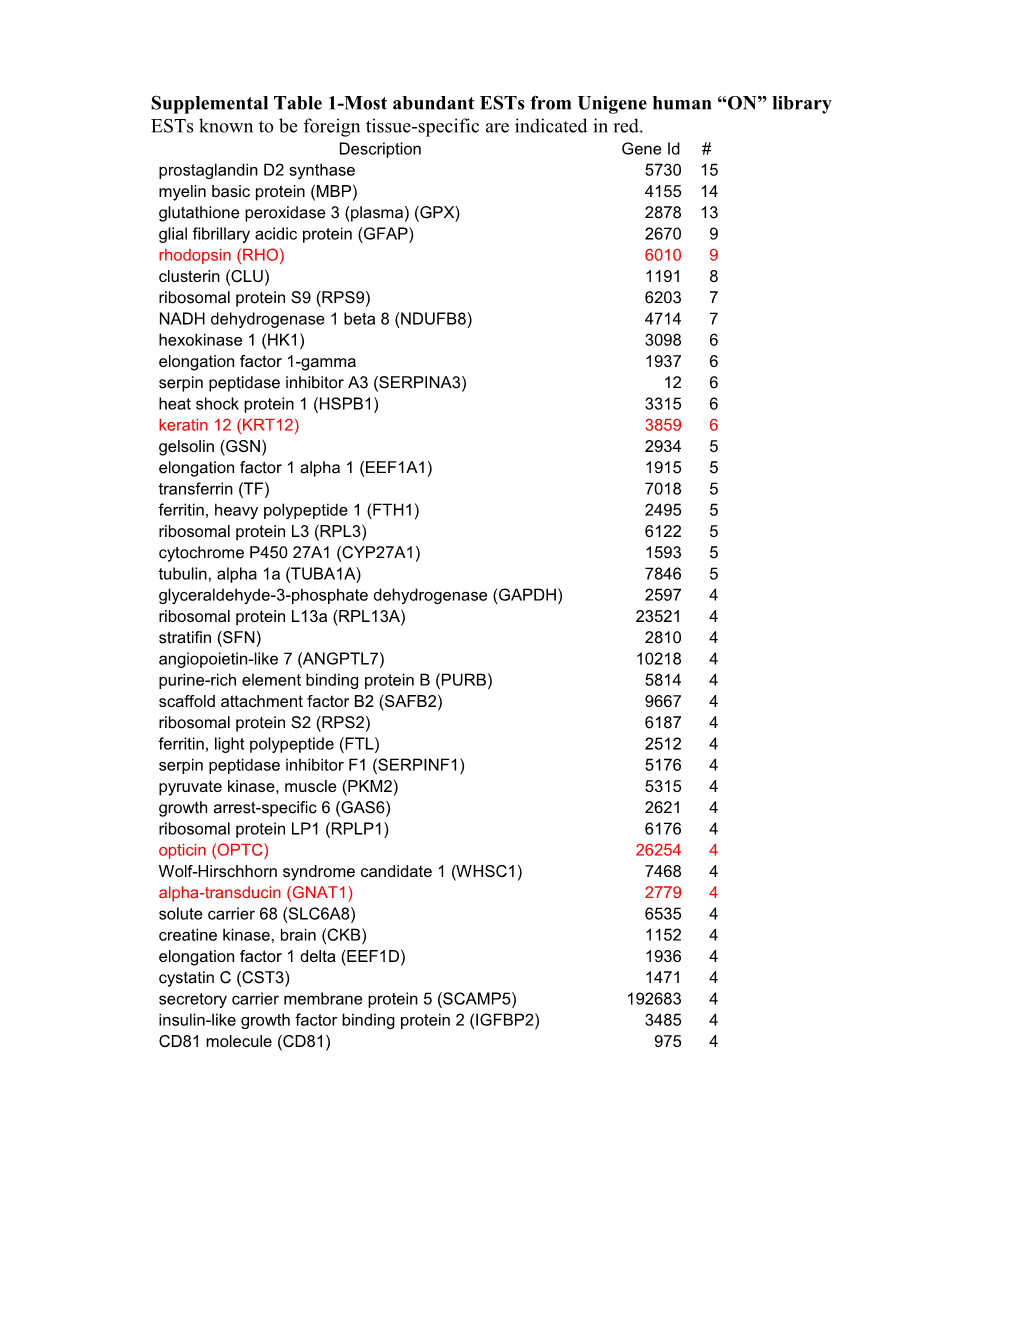 Supplemental Table 1-Most Abundant Ests from Unigene Human on Library